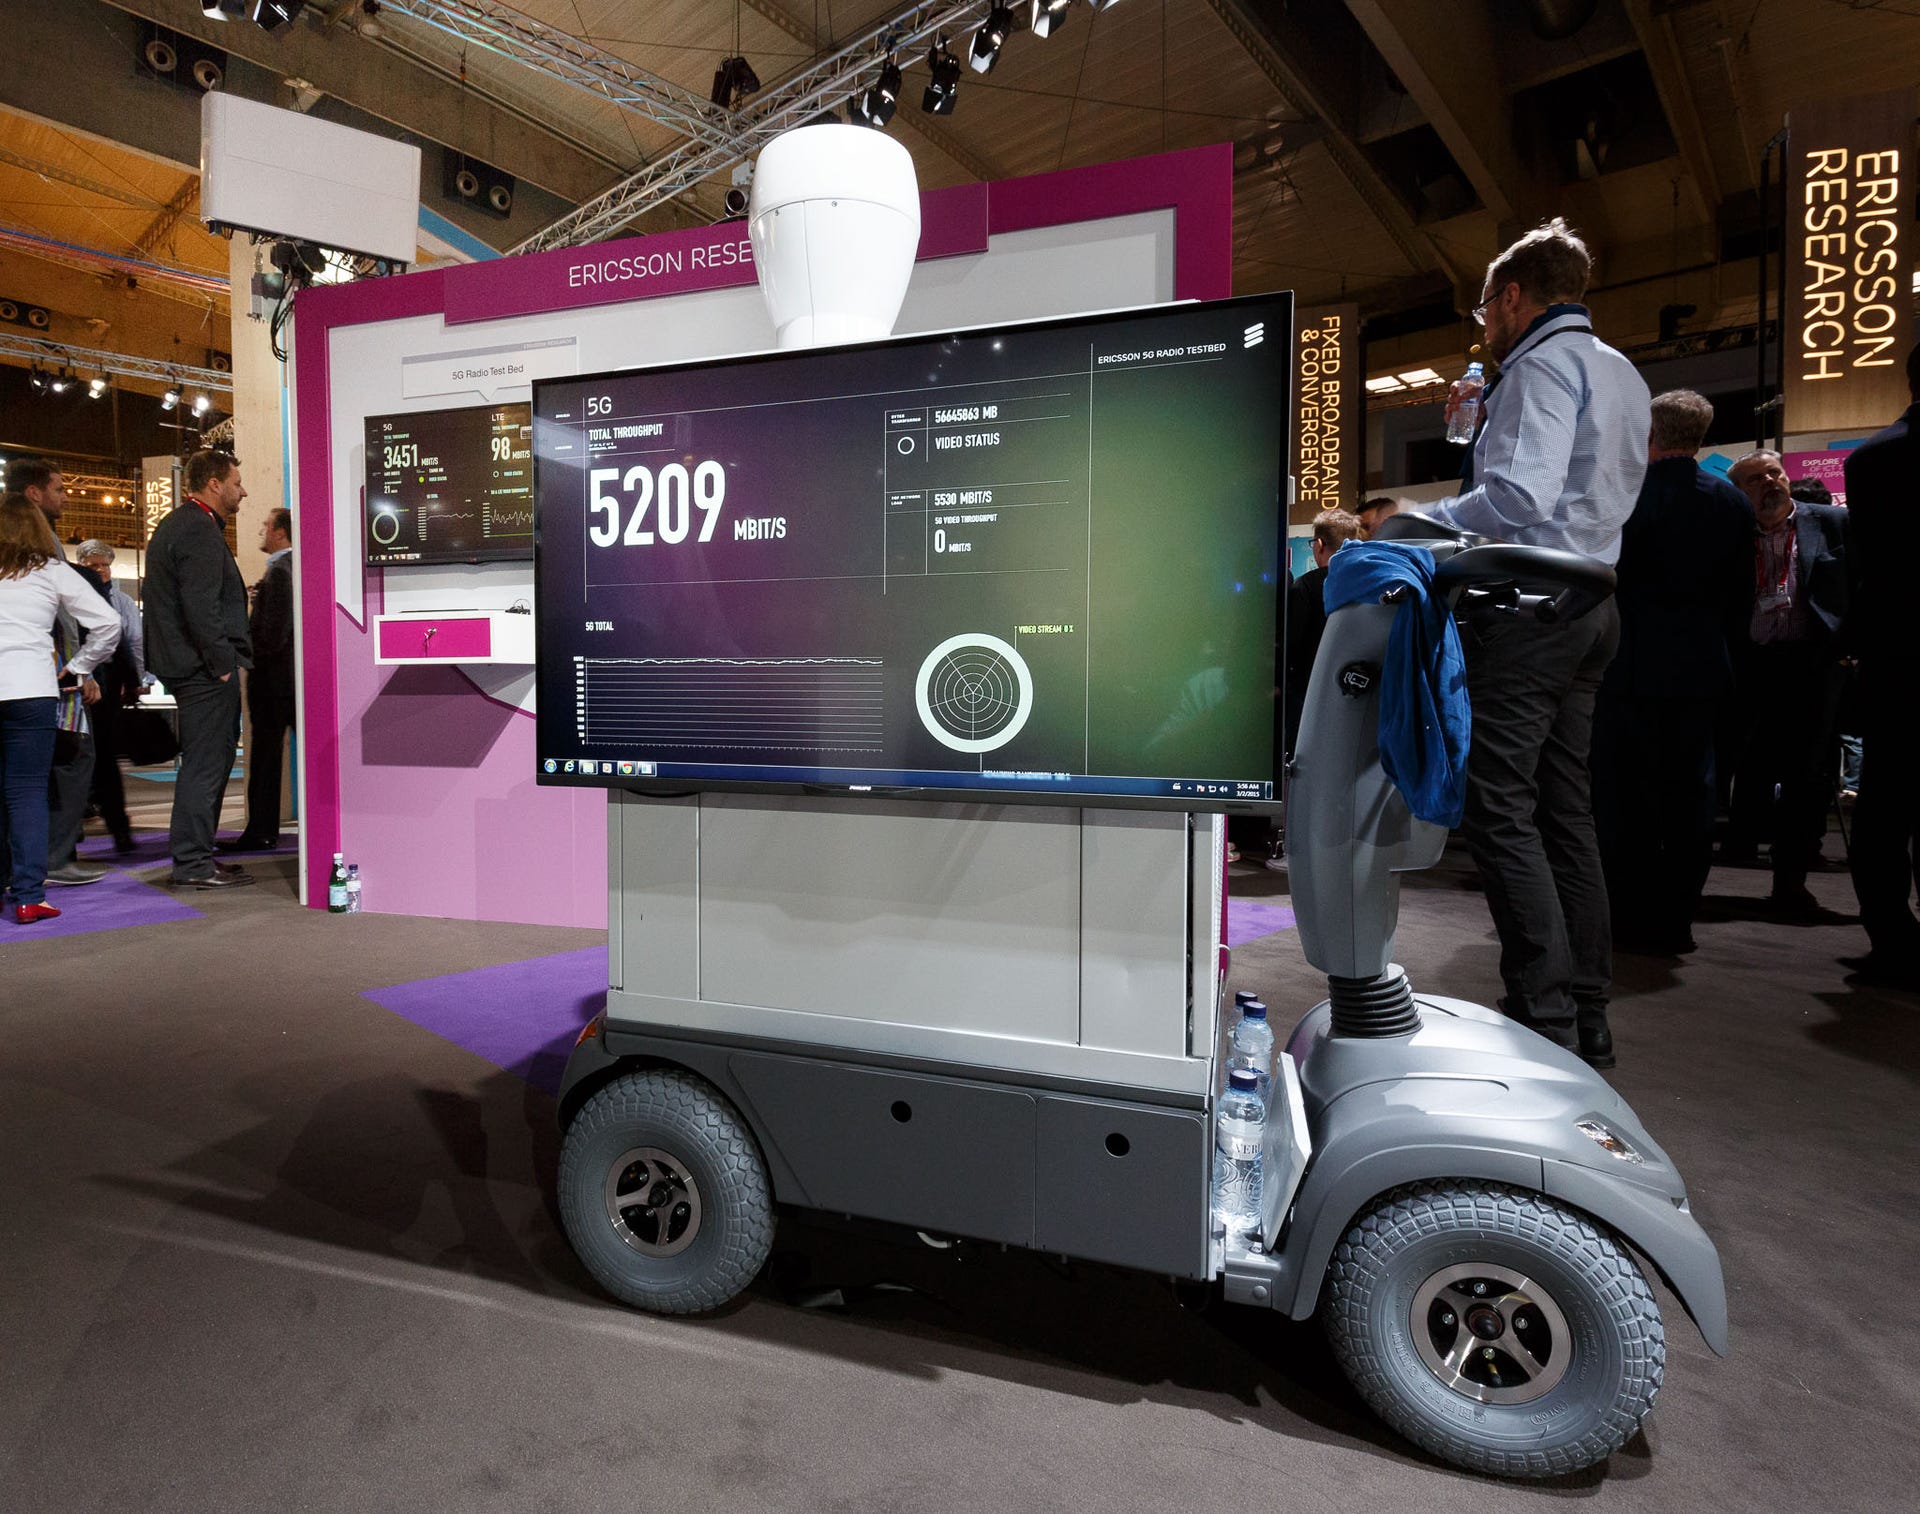 Ericsson showed a wireless radio link with prototype 5G networking technology at Mobile World Congress​. The equipment could sustain data transfer rates of 5.8Gbps between the base station antenna in the upper left and the receiver on the cart.